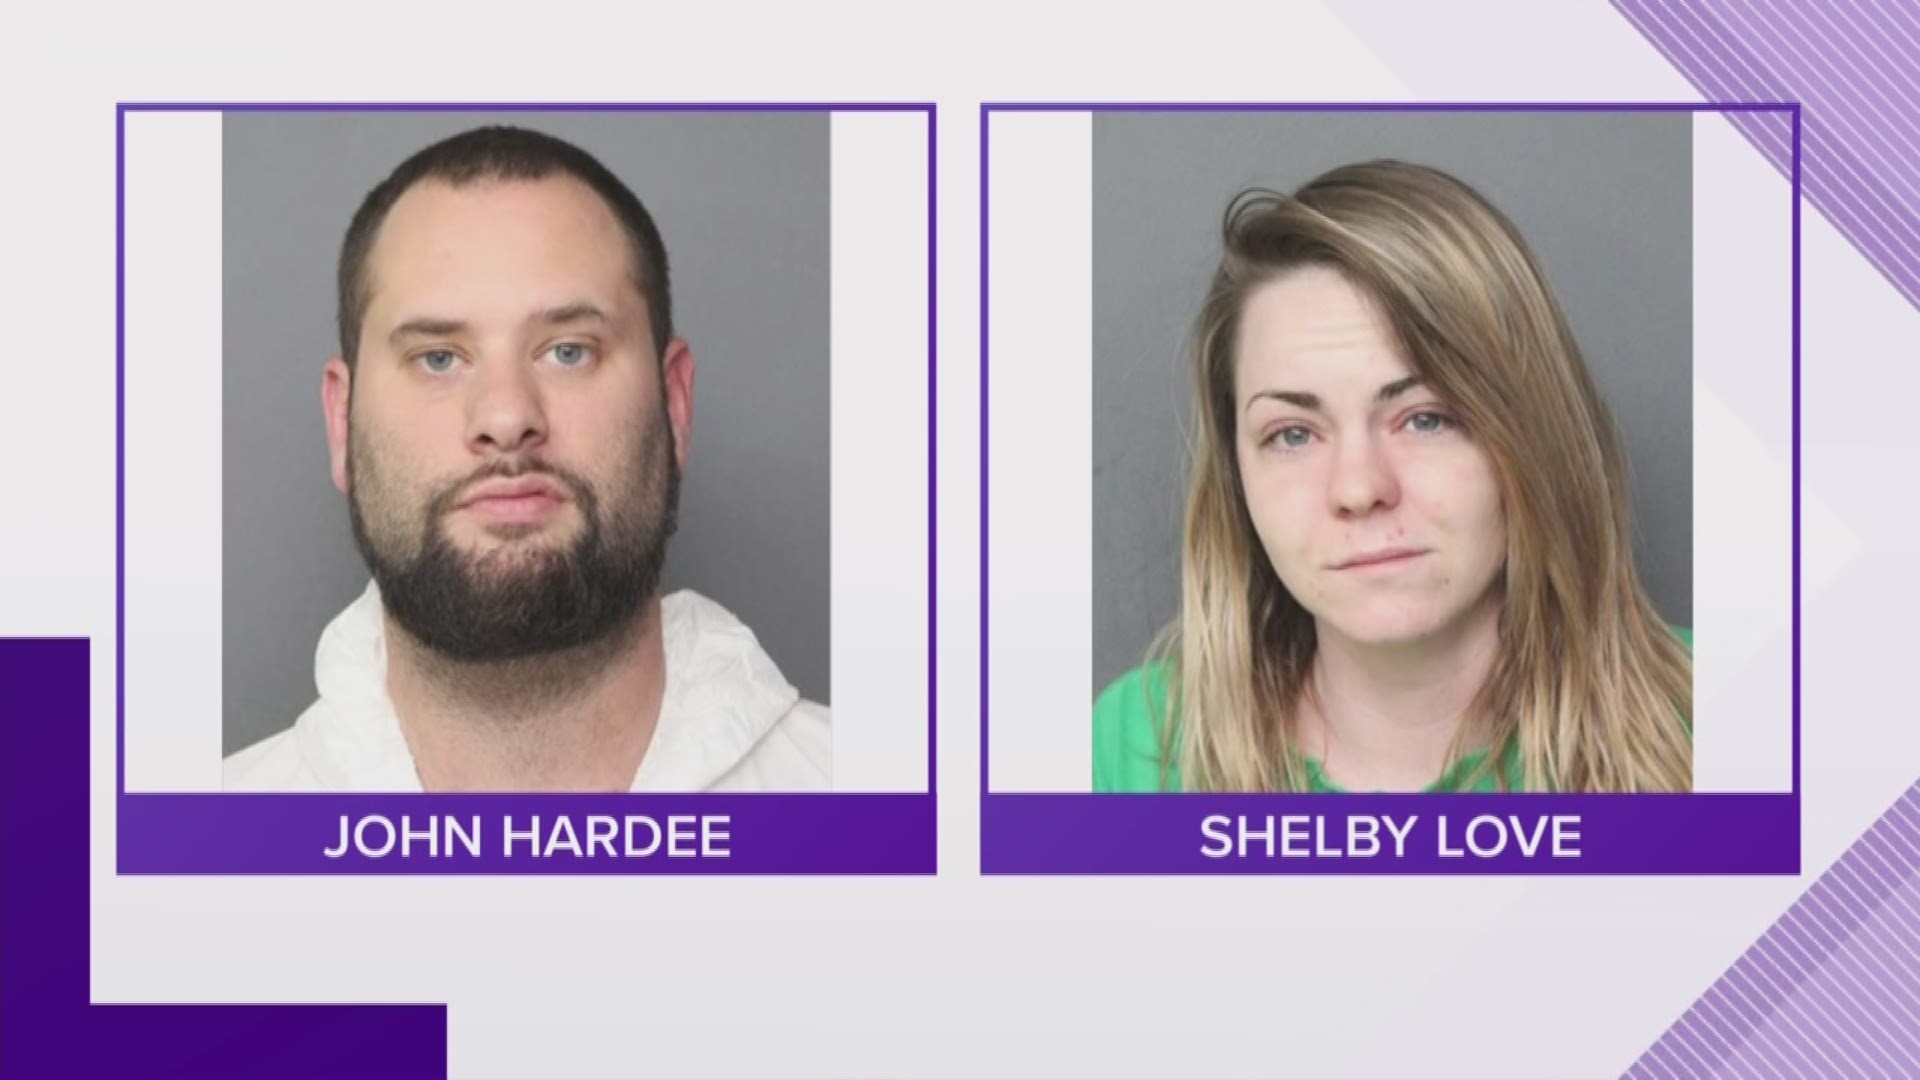 A judge ruled there is probable cause against two people, charged in the death of a 2-year-old Norfolk girl.